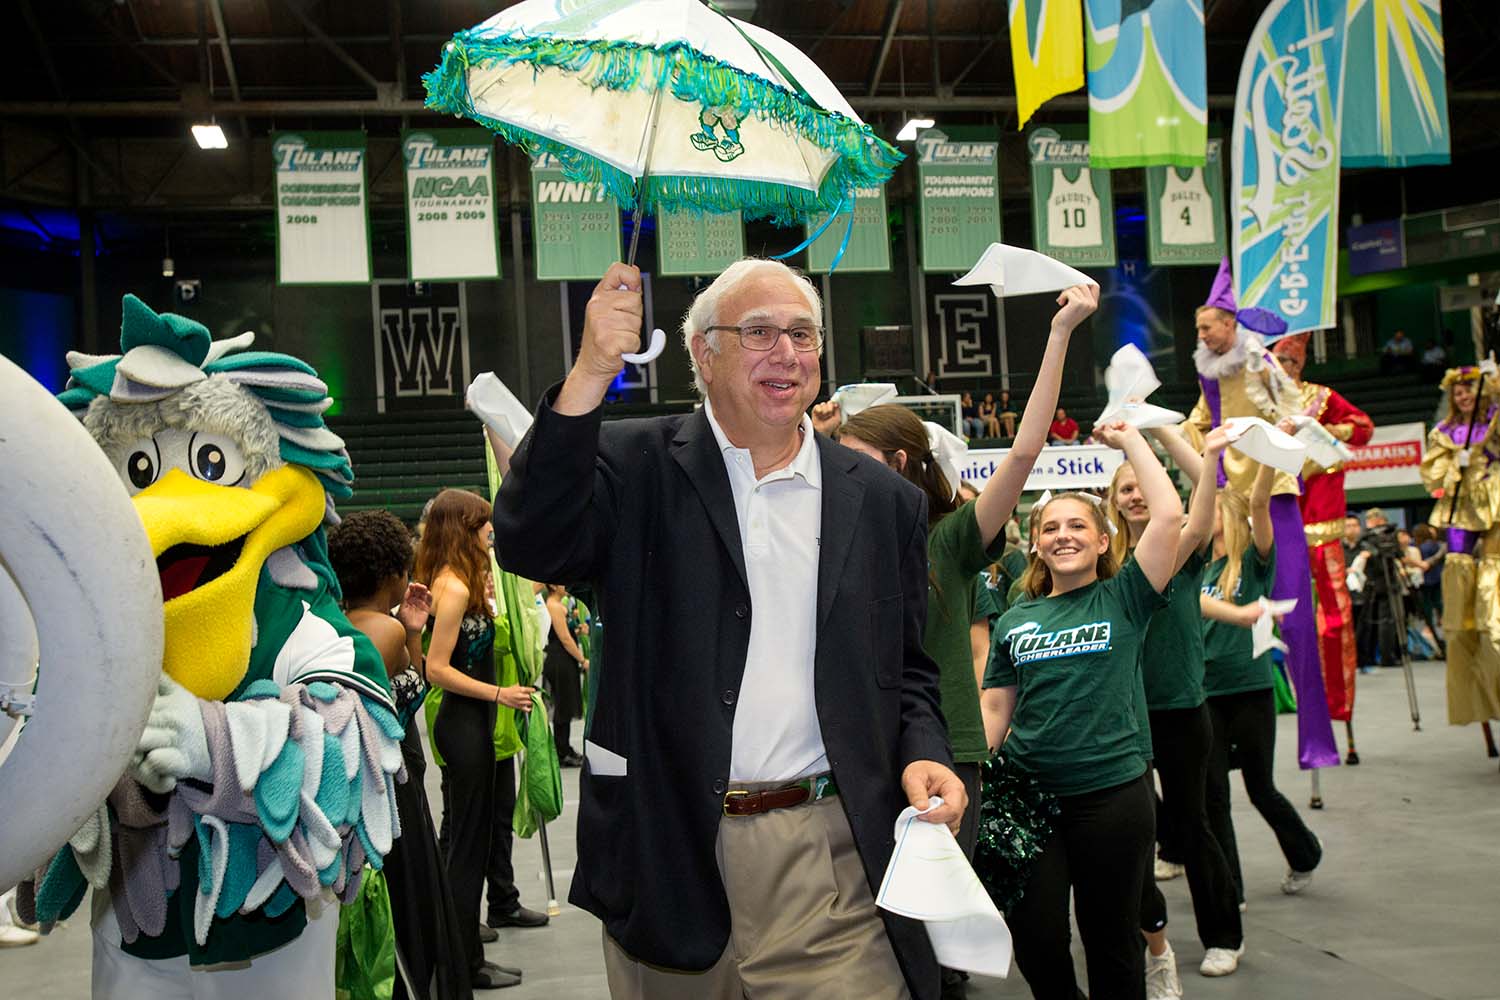 Cowen participates in a parade with other Tulane students and pelican mascot